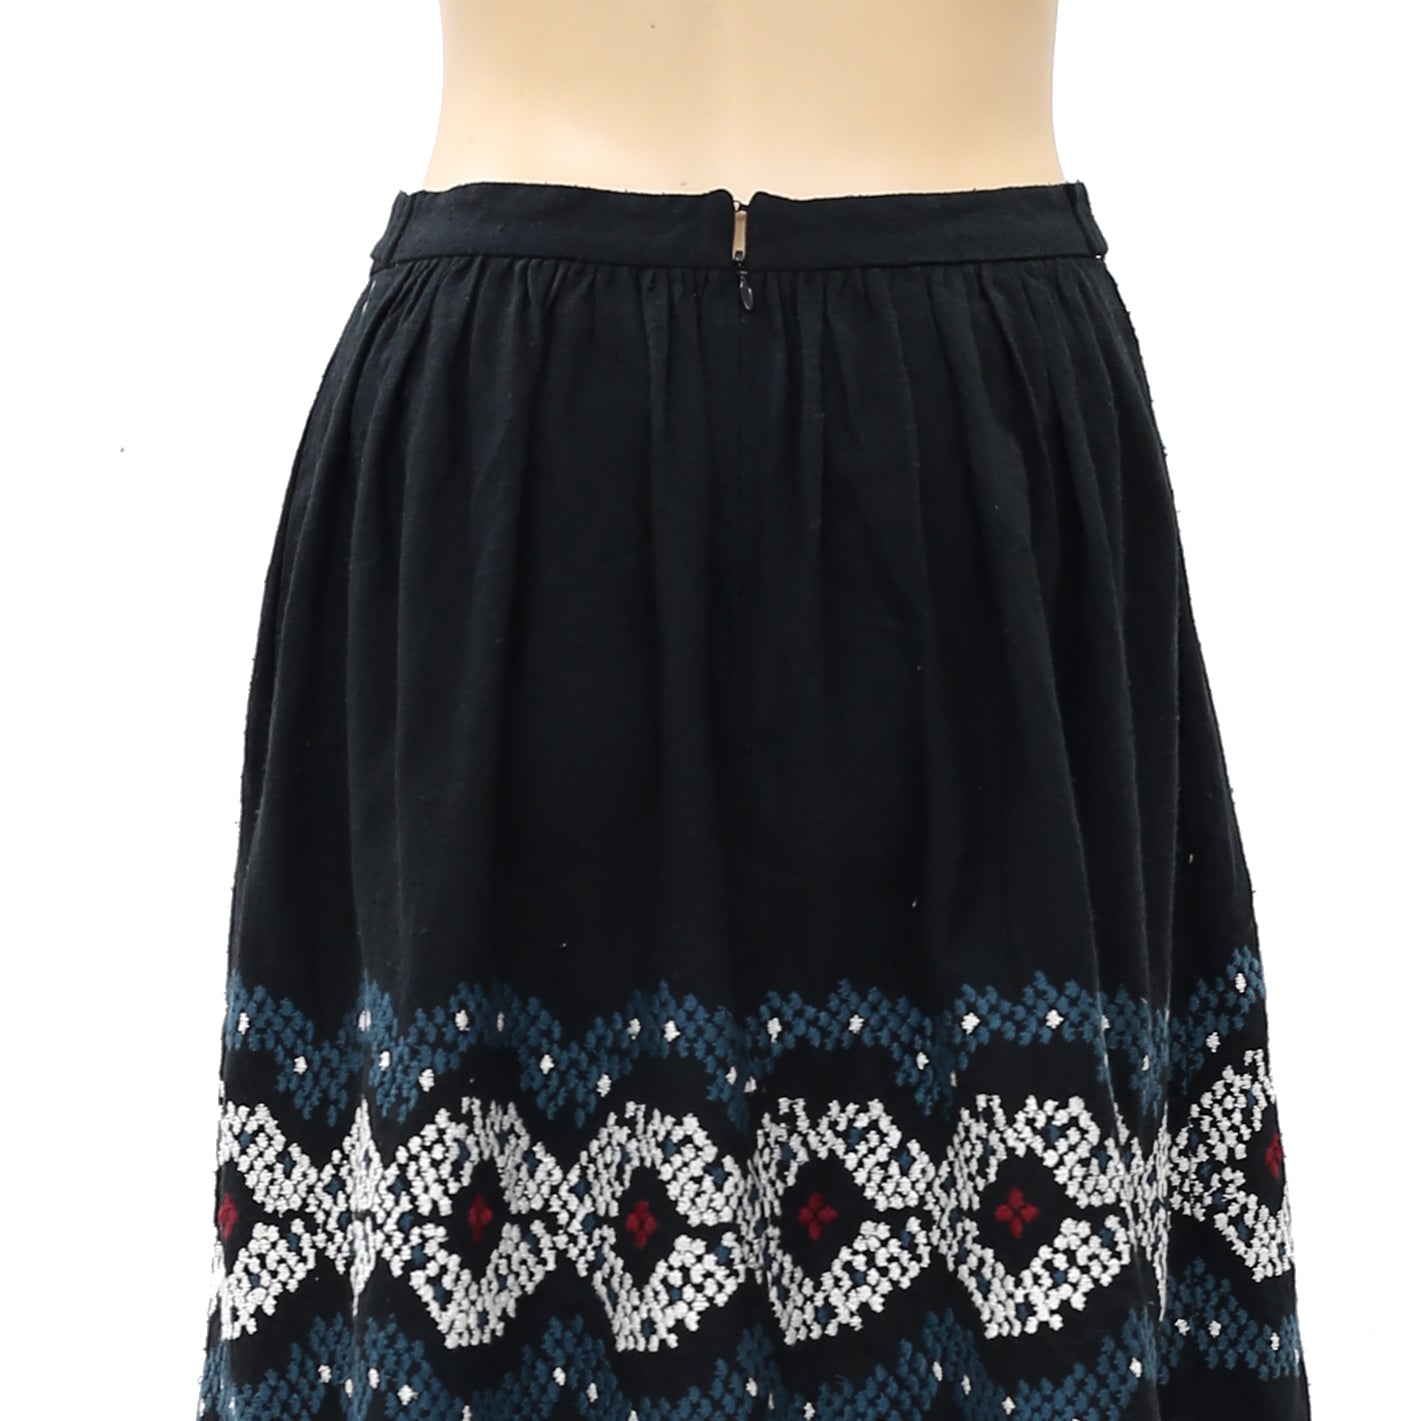 Anthropologie Floral Embroidered Mini Skirt